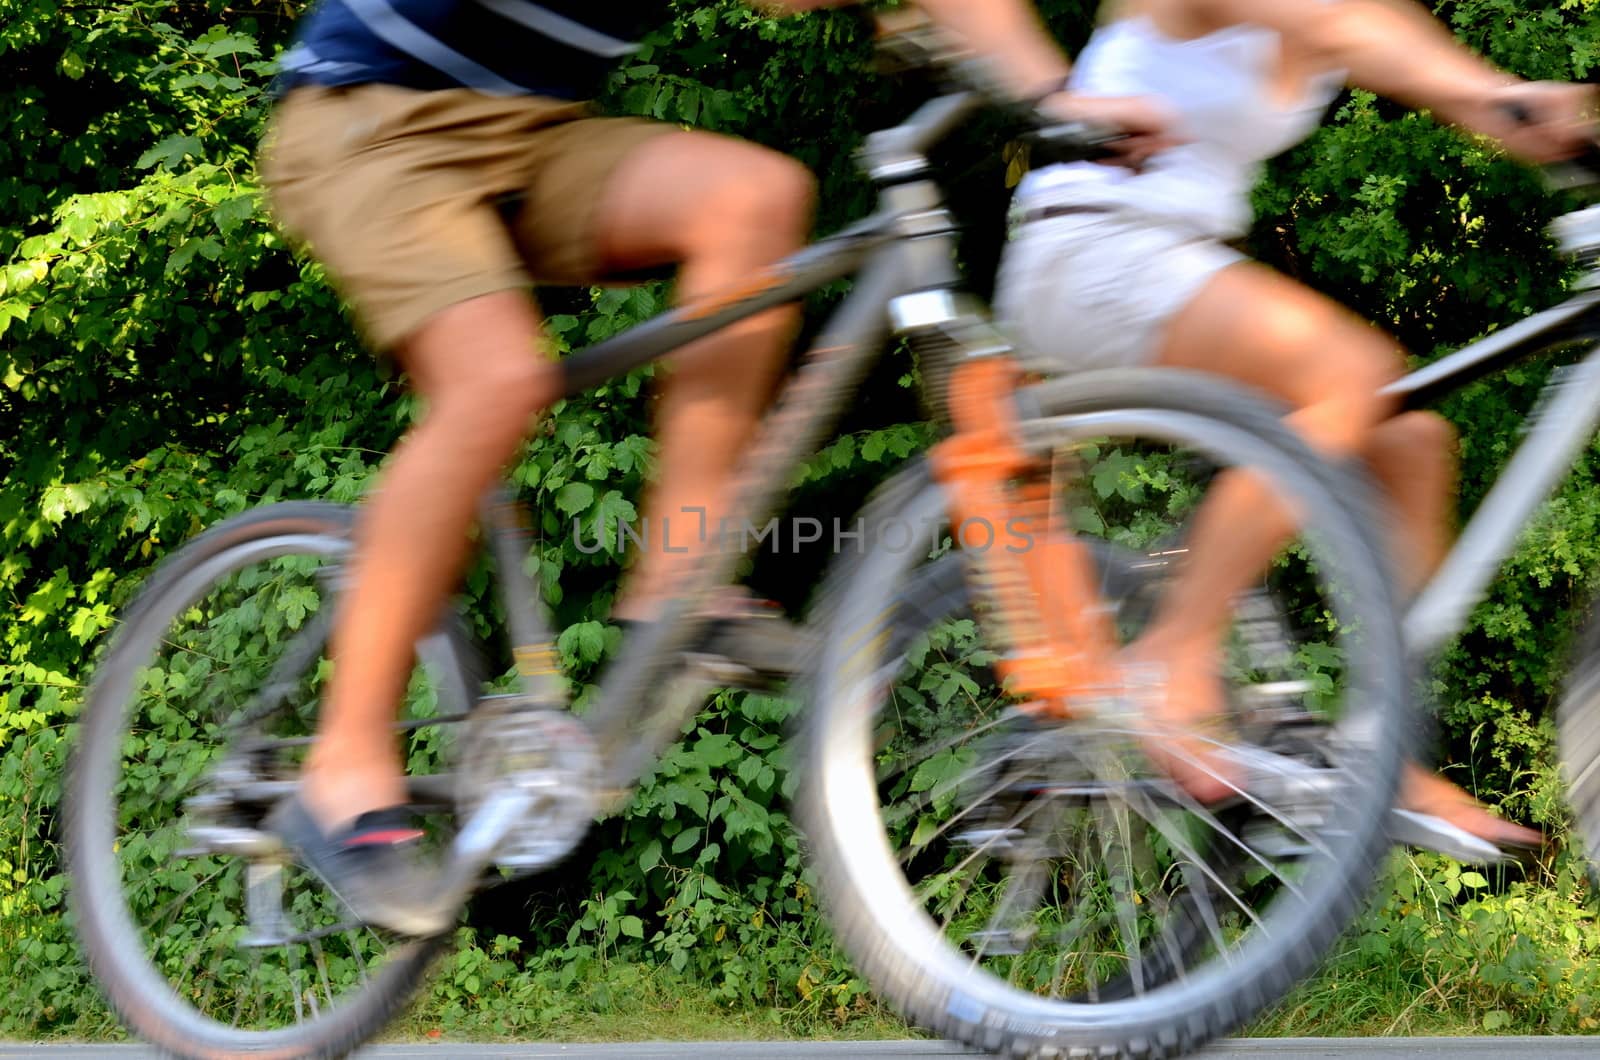 Healthy Lifestyle Image Of A Couple Cycling WIth Blurred Motion